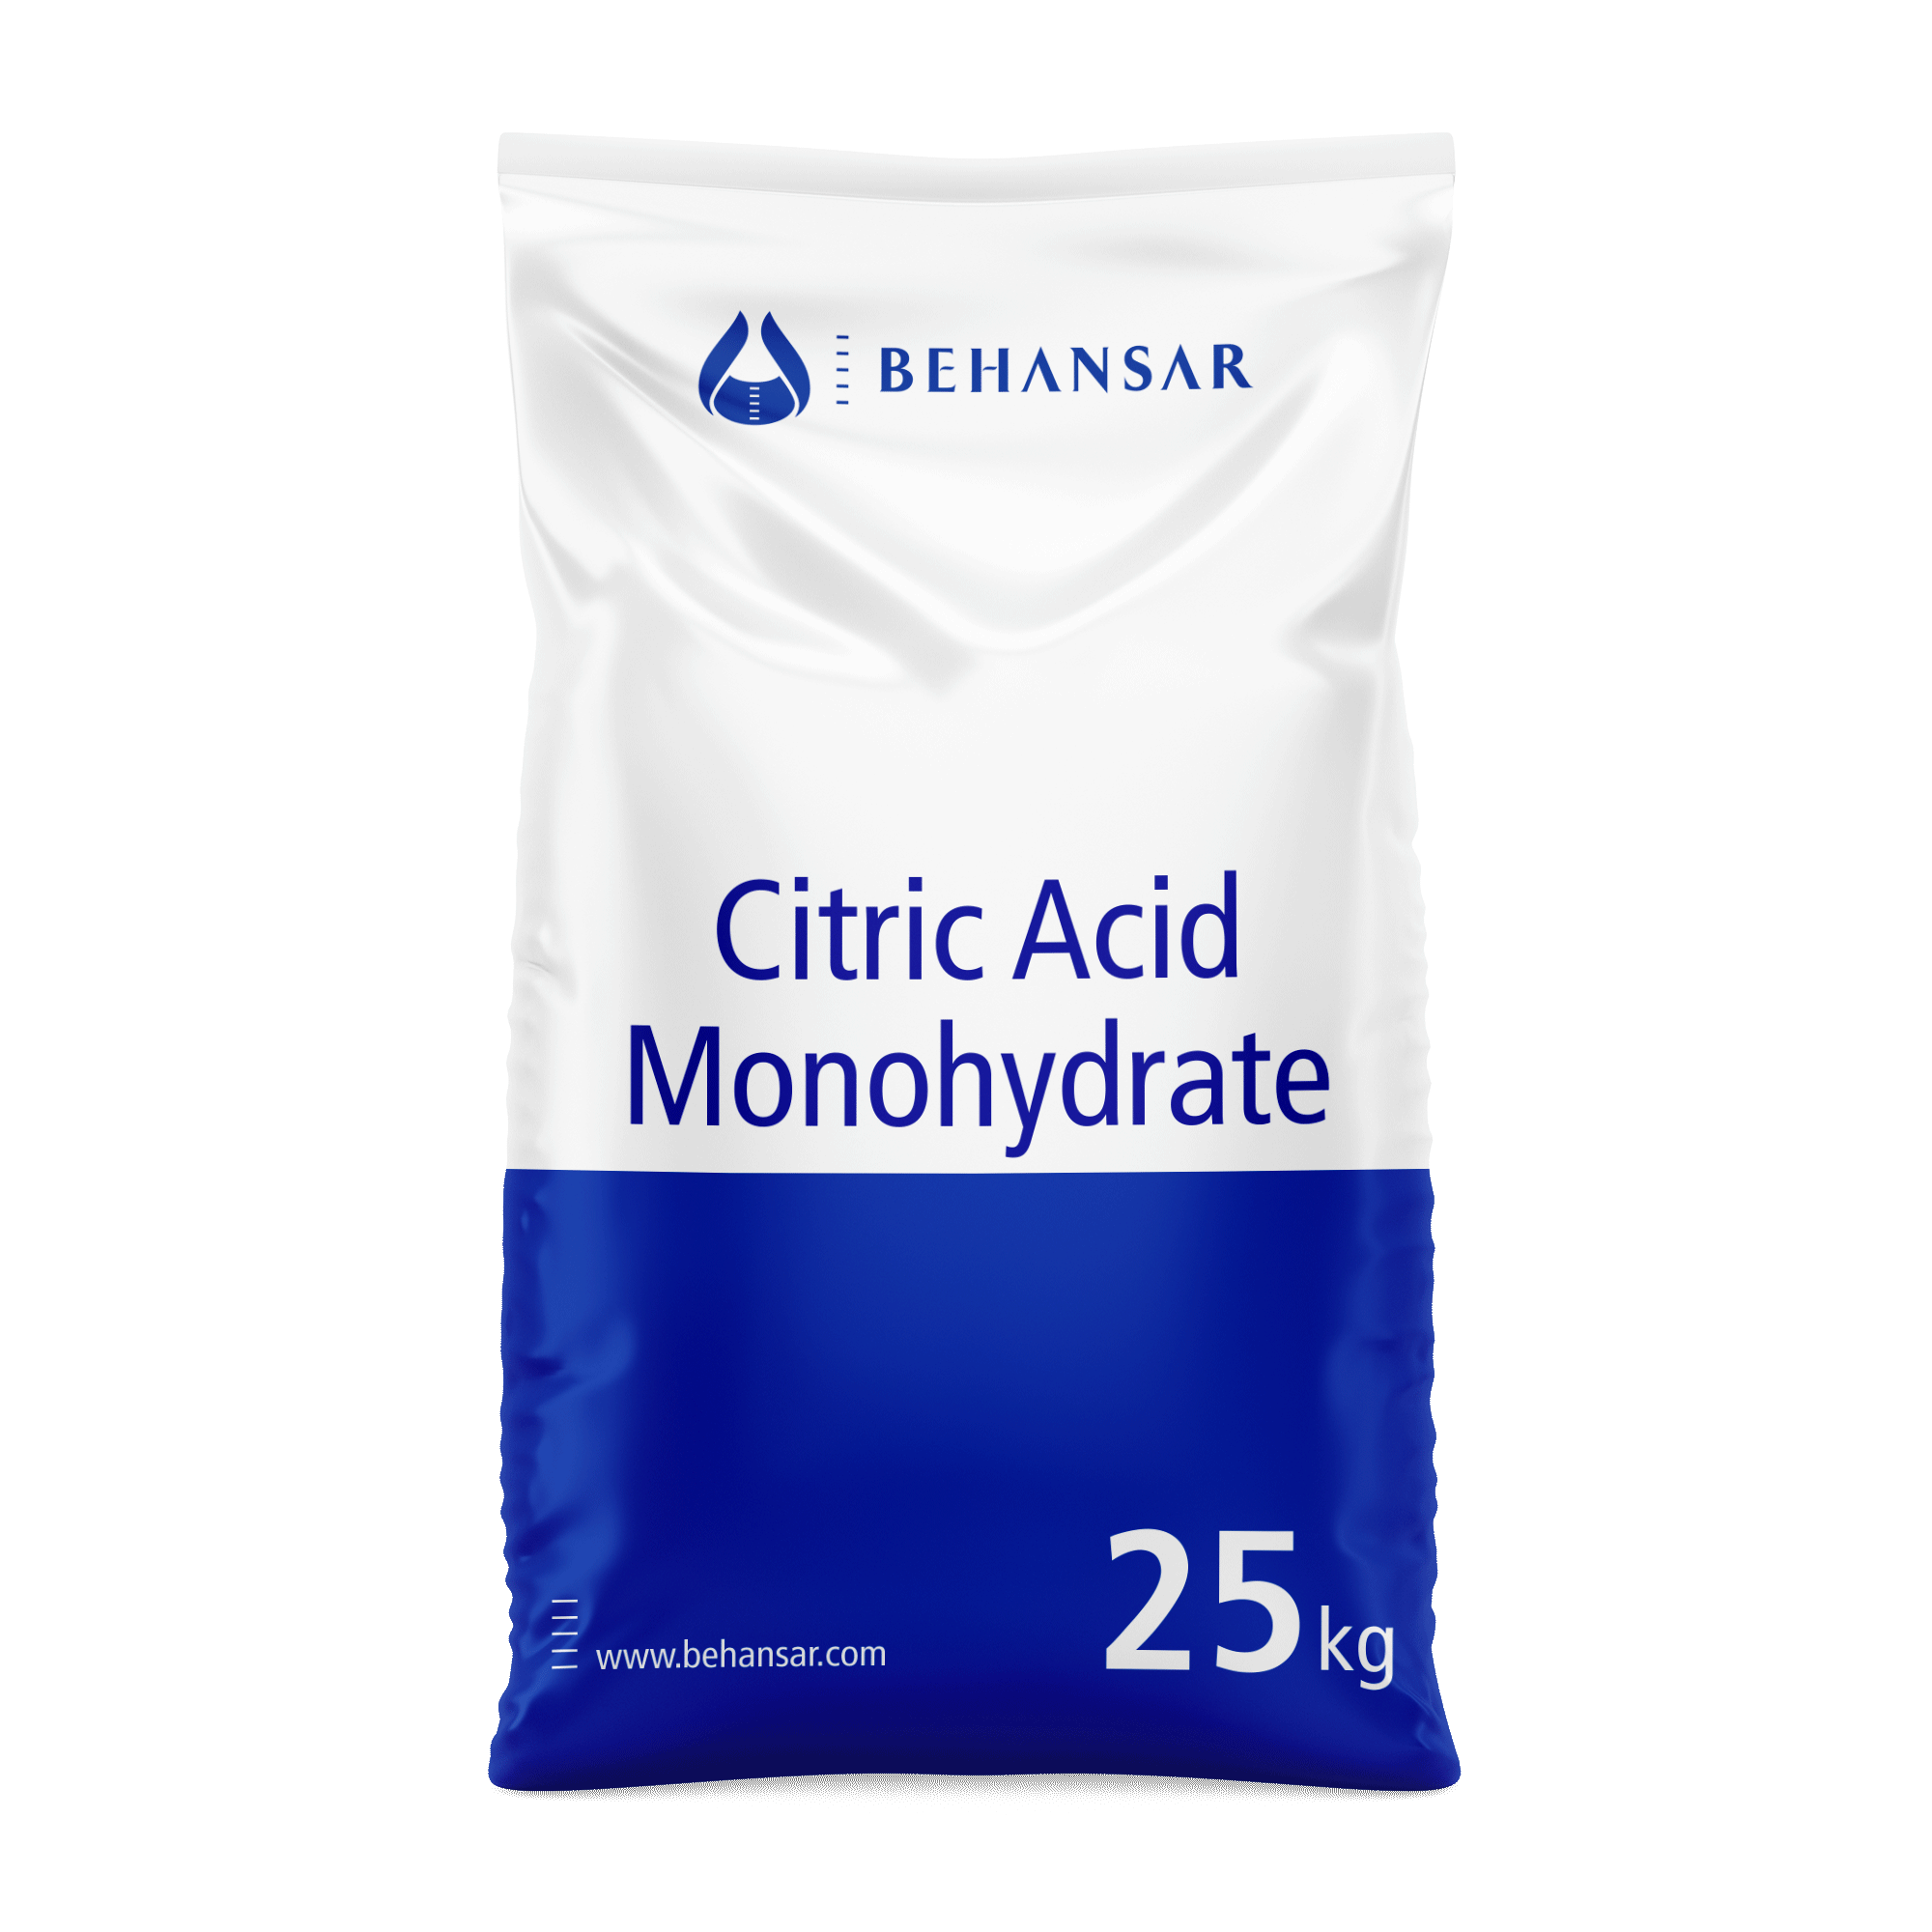 Citric Acid Monohydrate is one of the products of Behansar Co